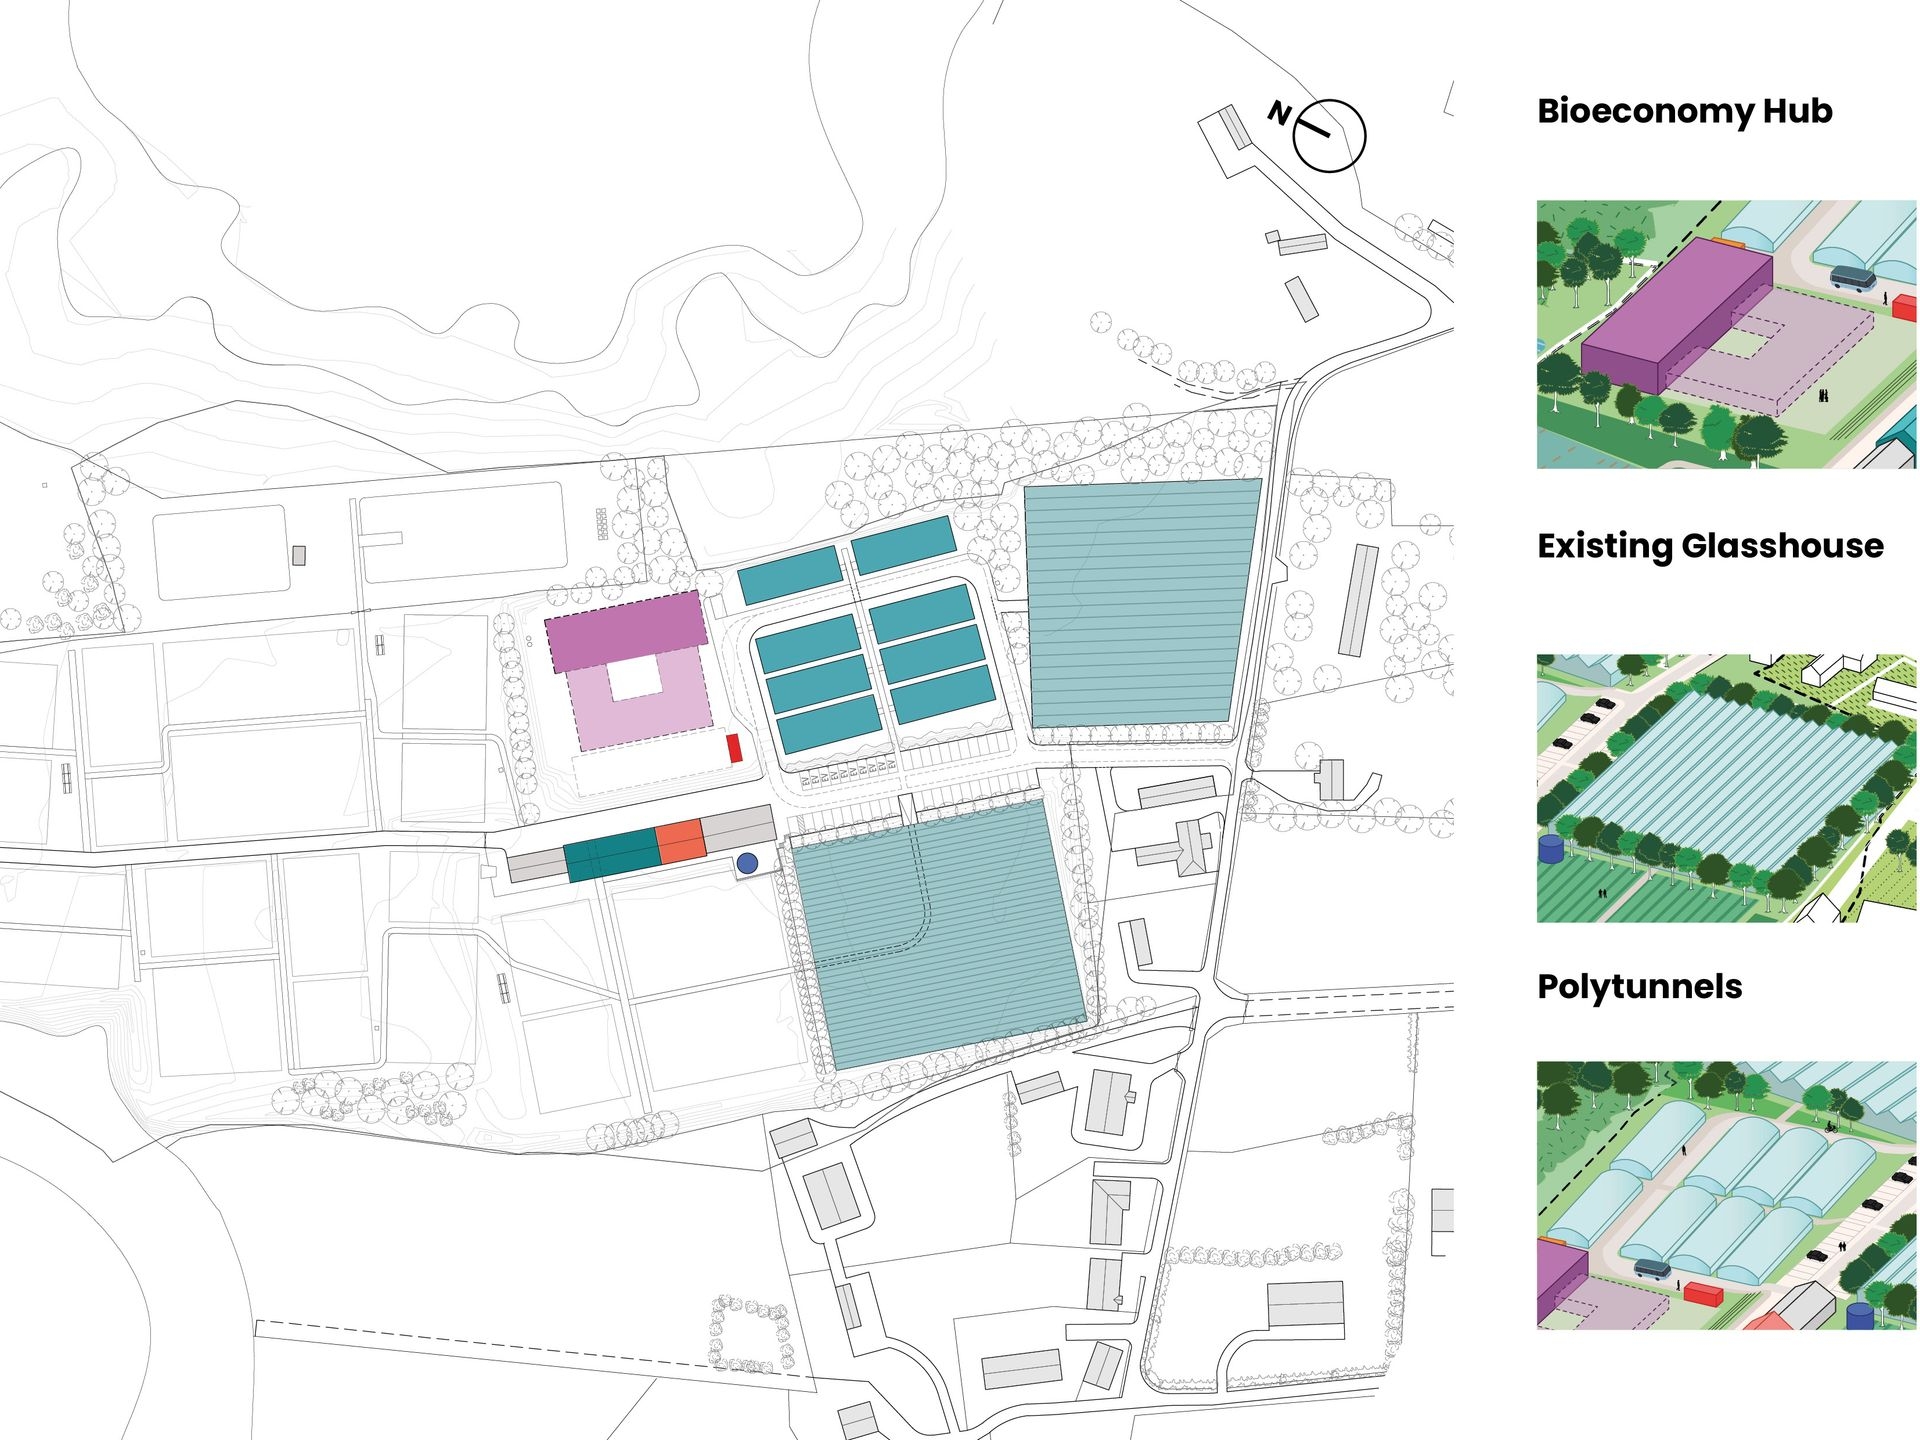 The masterplan structures consist of existing buildings that will be
updated and new buildings that will create the overall bioeconomy
environment.